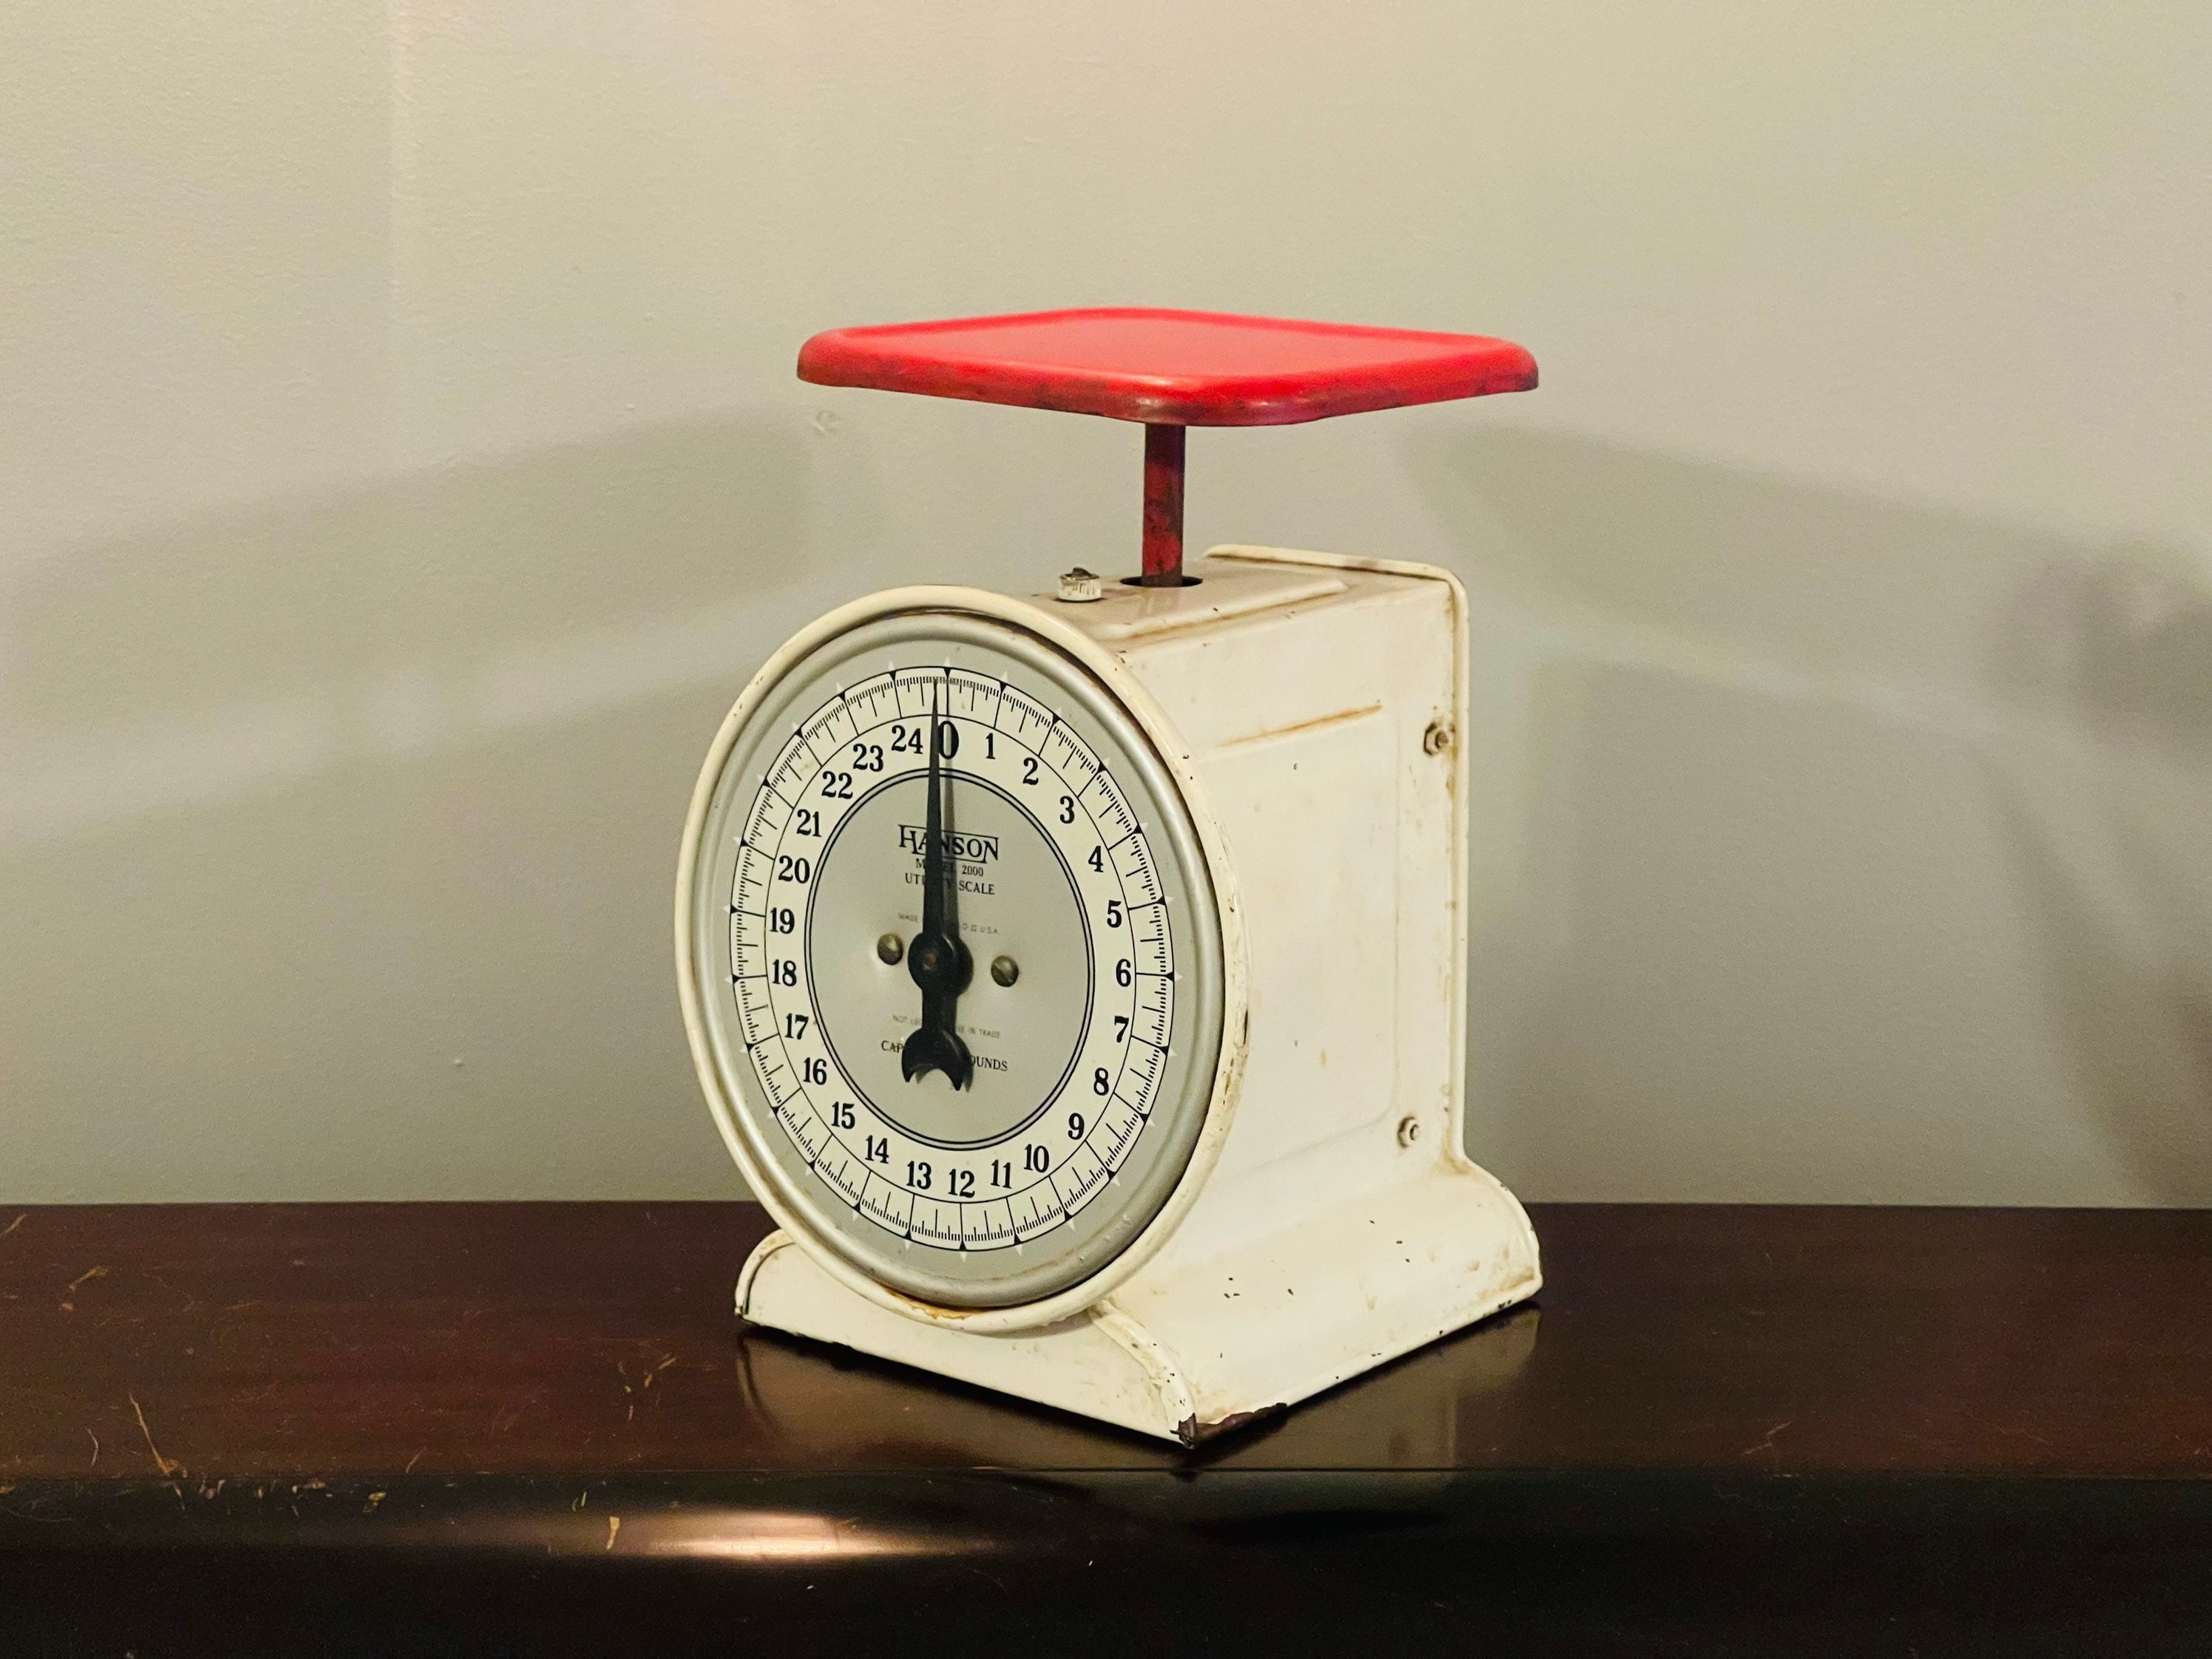 Vintage Red Kitchen Scales Isolated On White Background Clipping